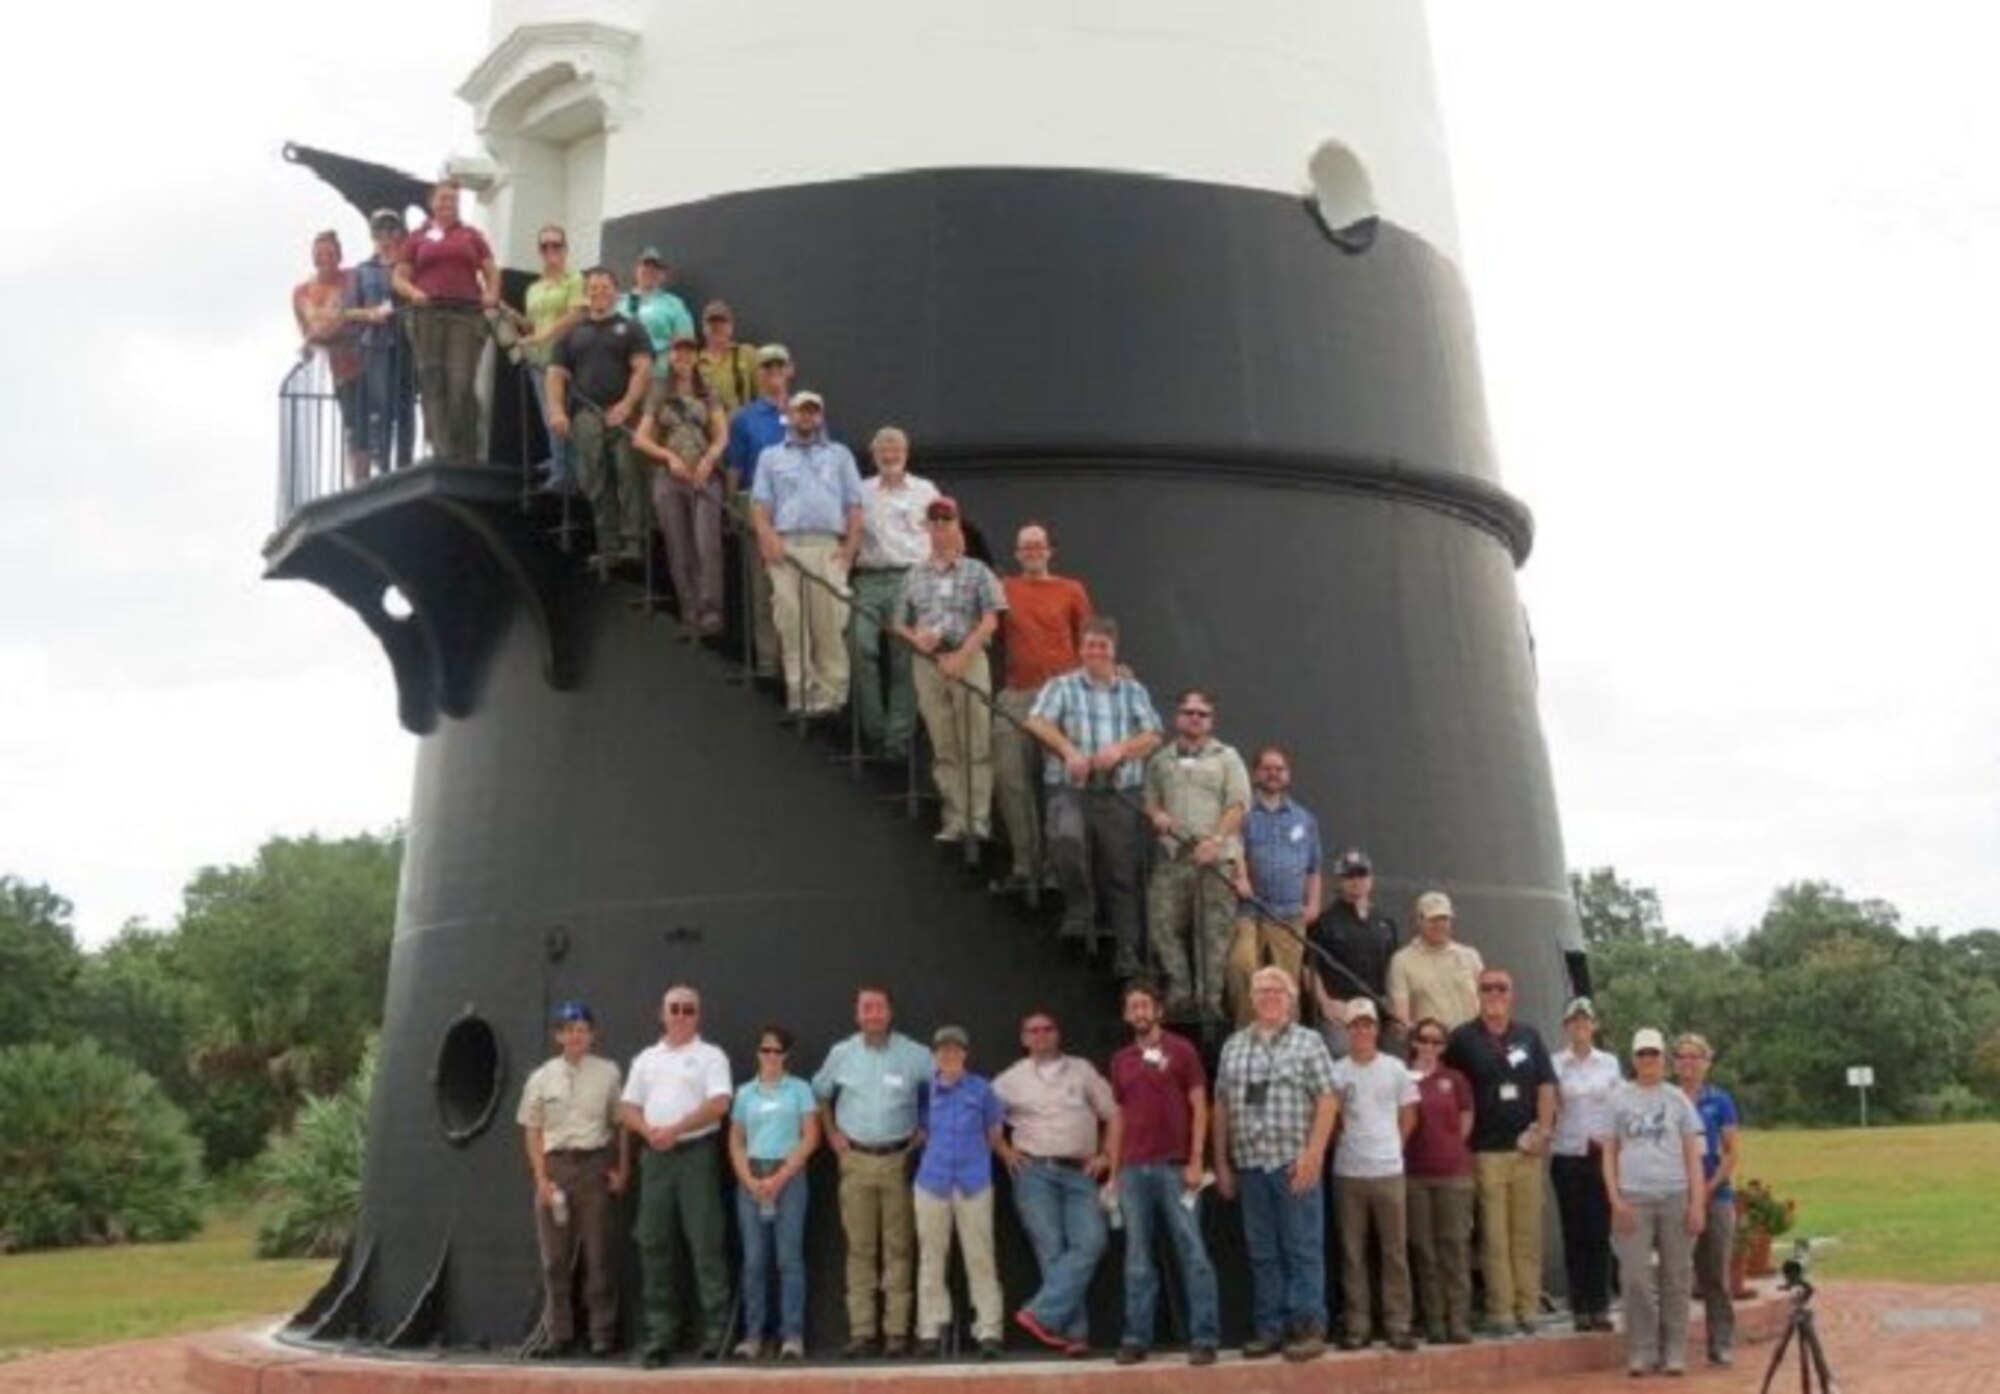 Members of the Gopher Tortoise Candidate Conservation Agreement team meeting pose for a photo at the Cape Canaveral Lighthouse at Cape Canaveral Air Force Station, Fla. June 7. The 45th Space Wing hosted the event here to show the group how they manage and protect gopher tortoise habitat on the Air Force's Eastern Range. Meeting participants from federal, state and the local agencies, as well other stakeholders are signing parties of the Candidate Conservation Agreement whose purpose to implement proactive gopher tortoise conservation measures across its eastern range which includes Florida, Georgia, Alabama and parts of South Carolina. (Courtesy photo)